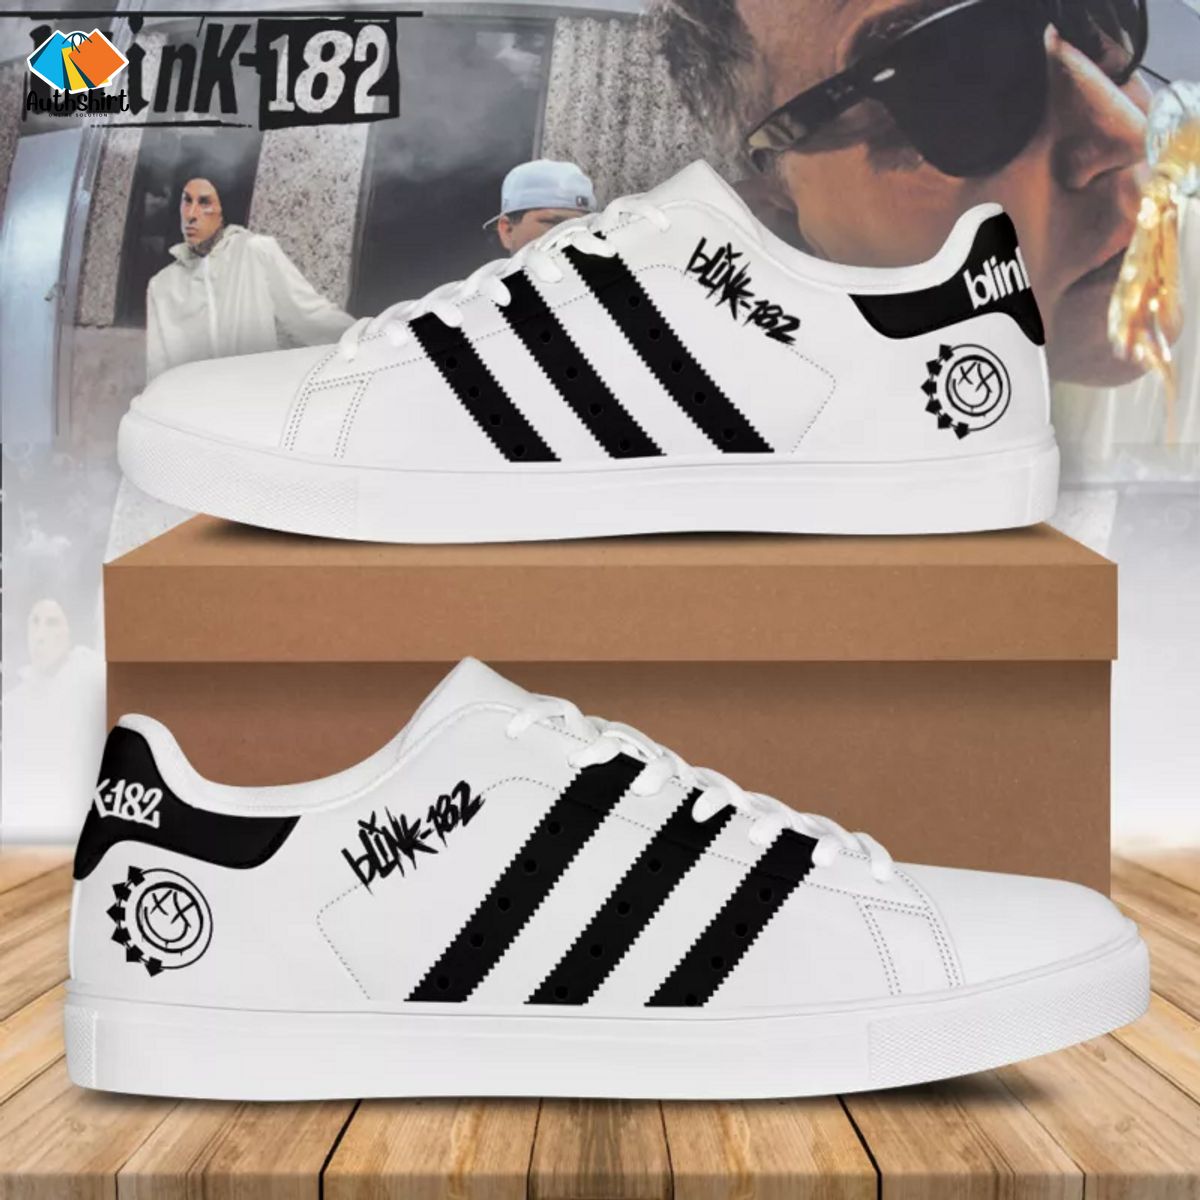 Blink 182 Stripes Style Stan Smith Shoes